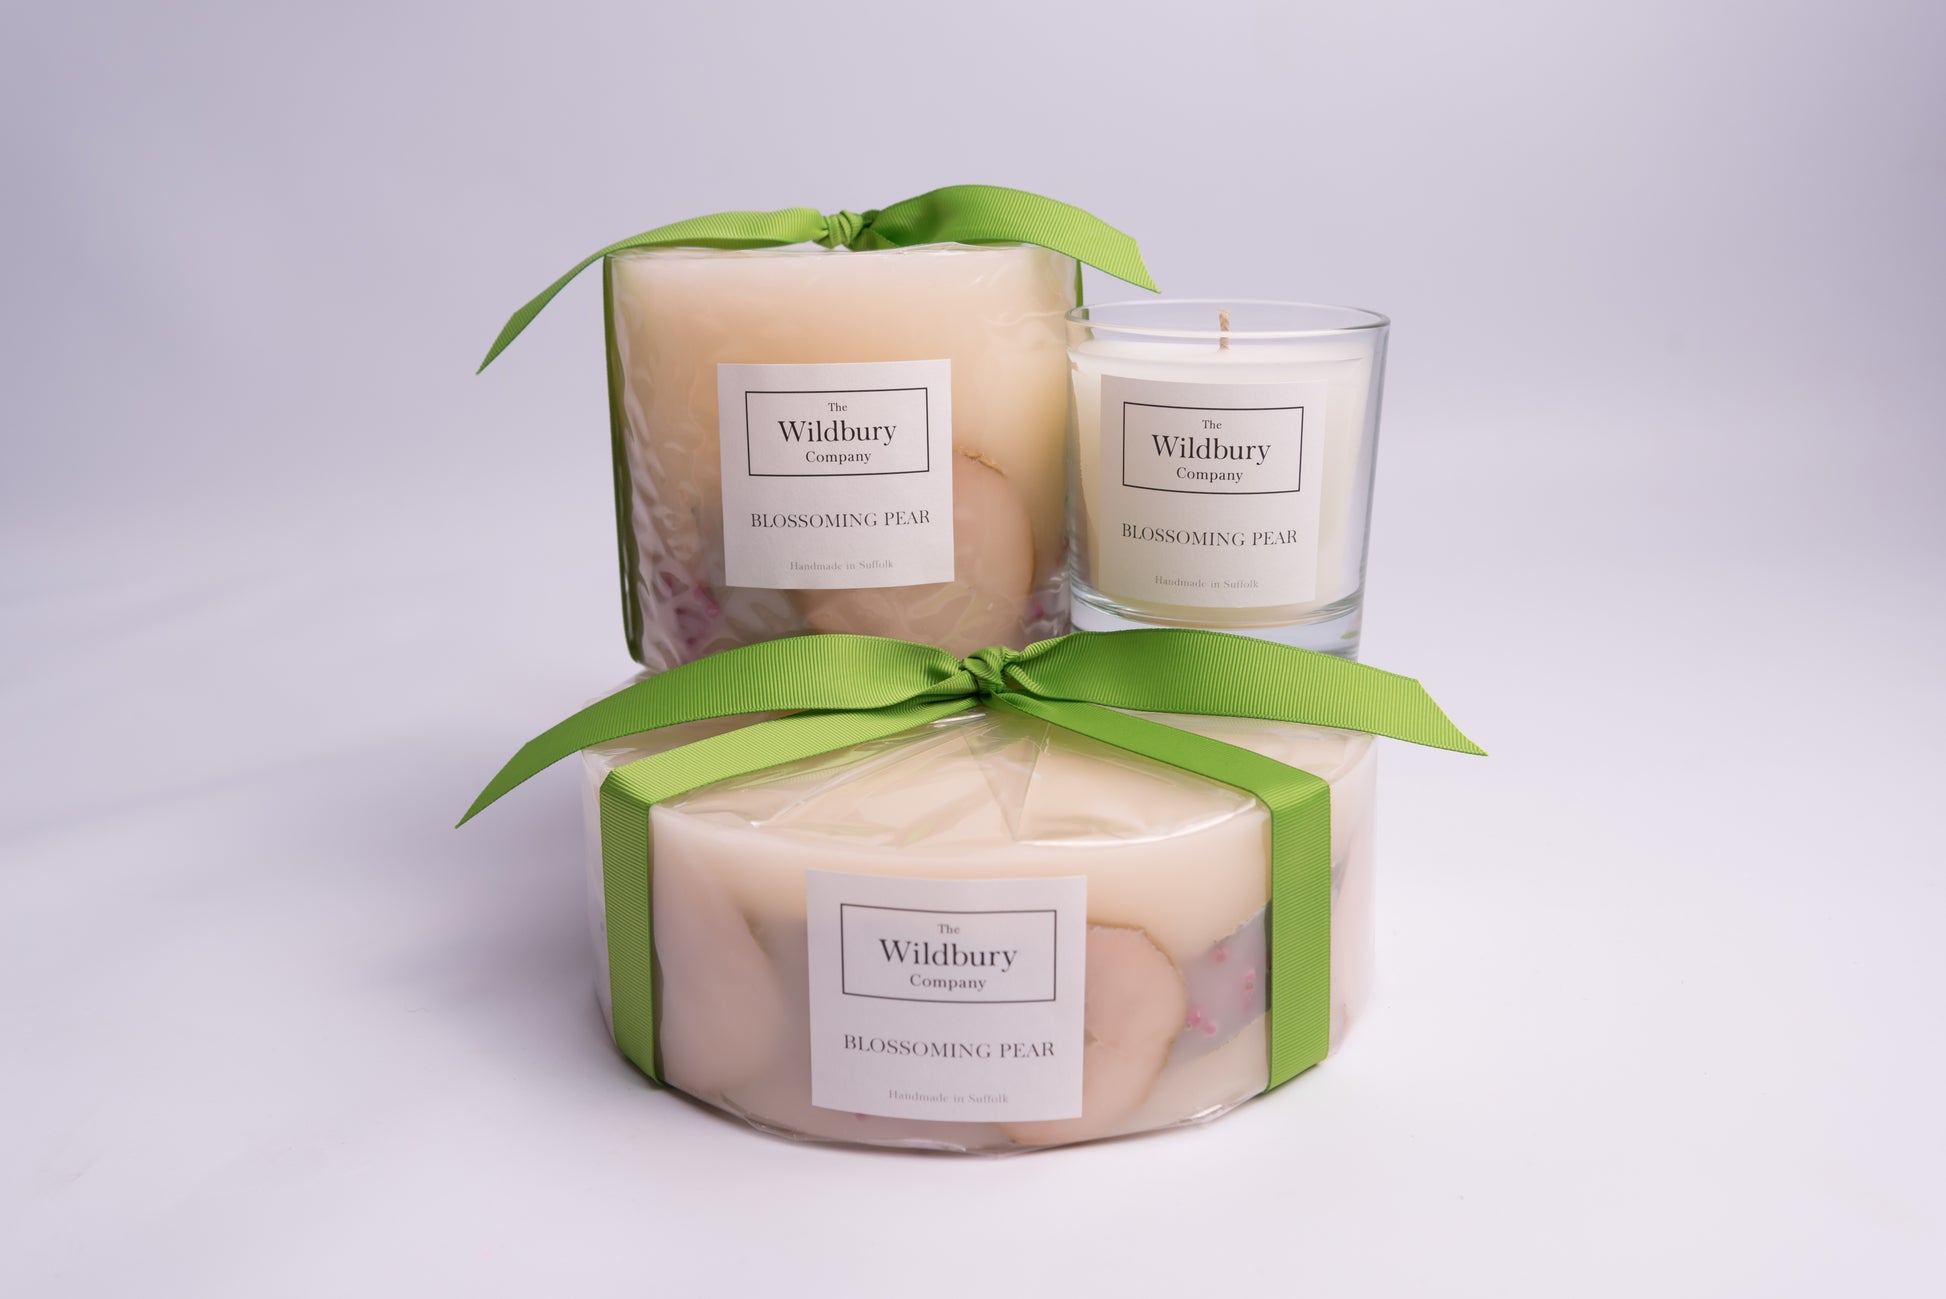 Collection of three candles, all in the fragrance Blossoming Pear layered on top of one another.